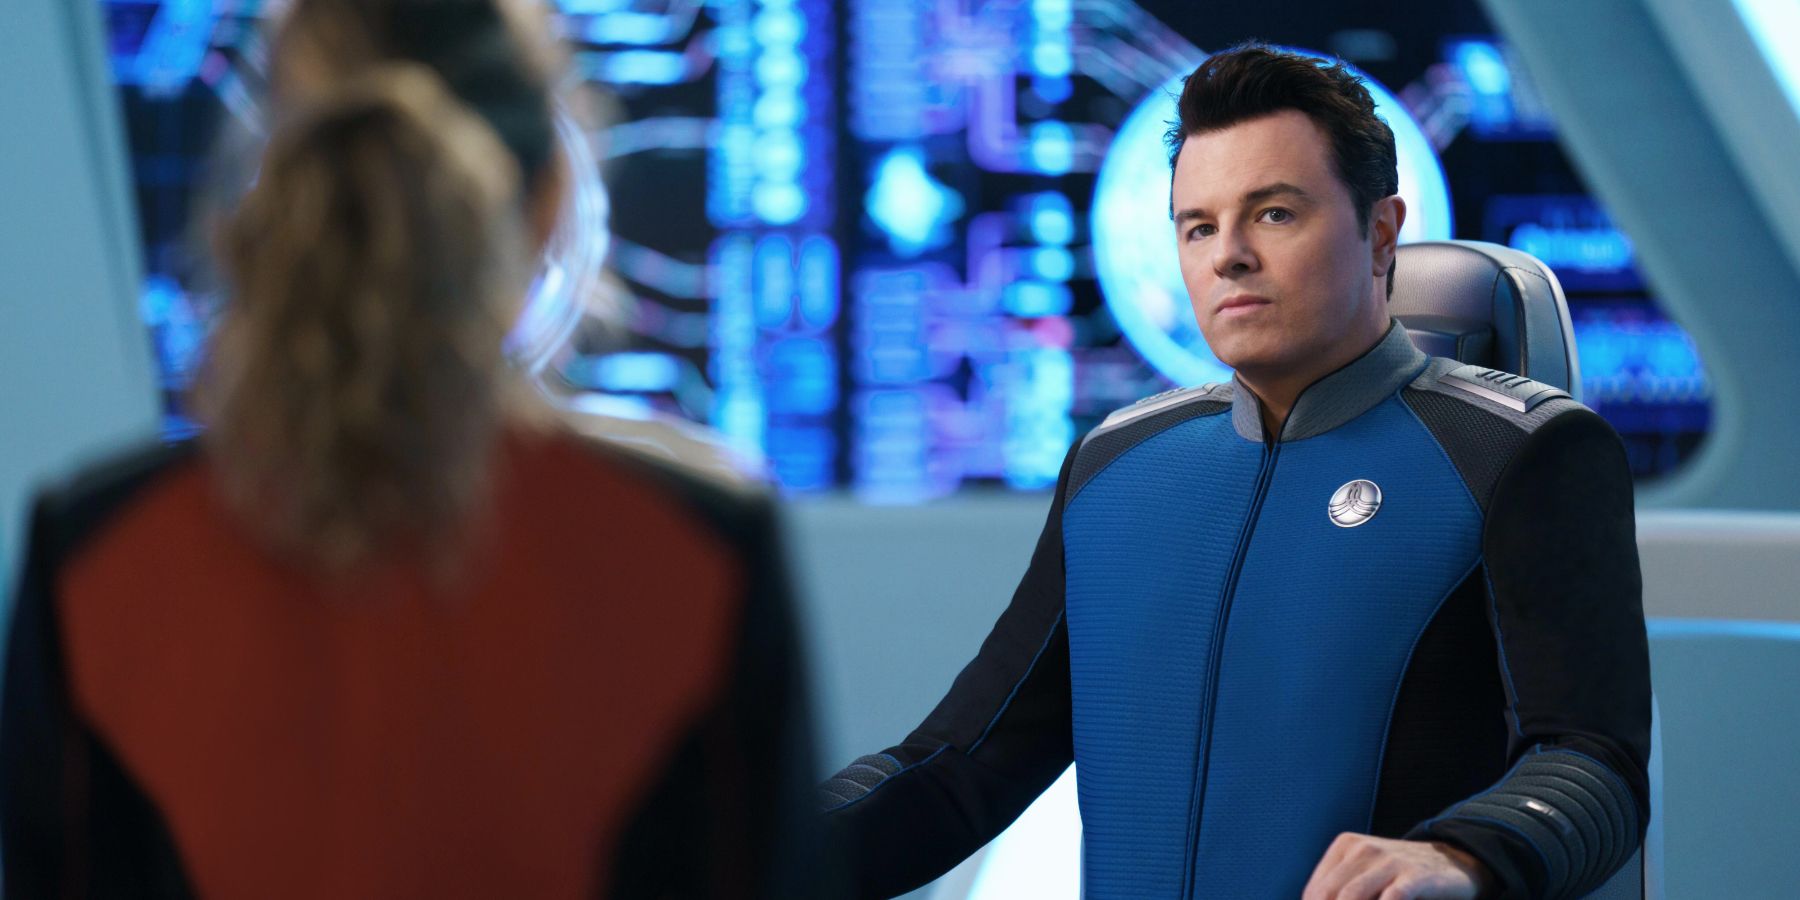 Captain Mercer sitting in chair in front of crew member in The Orville